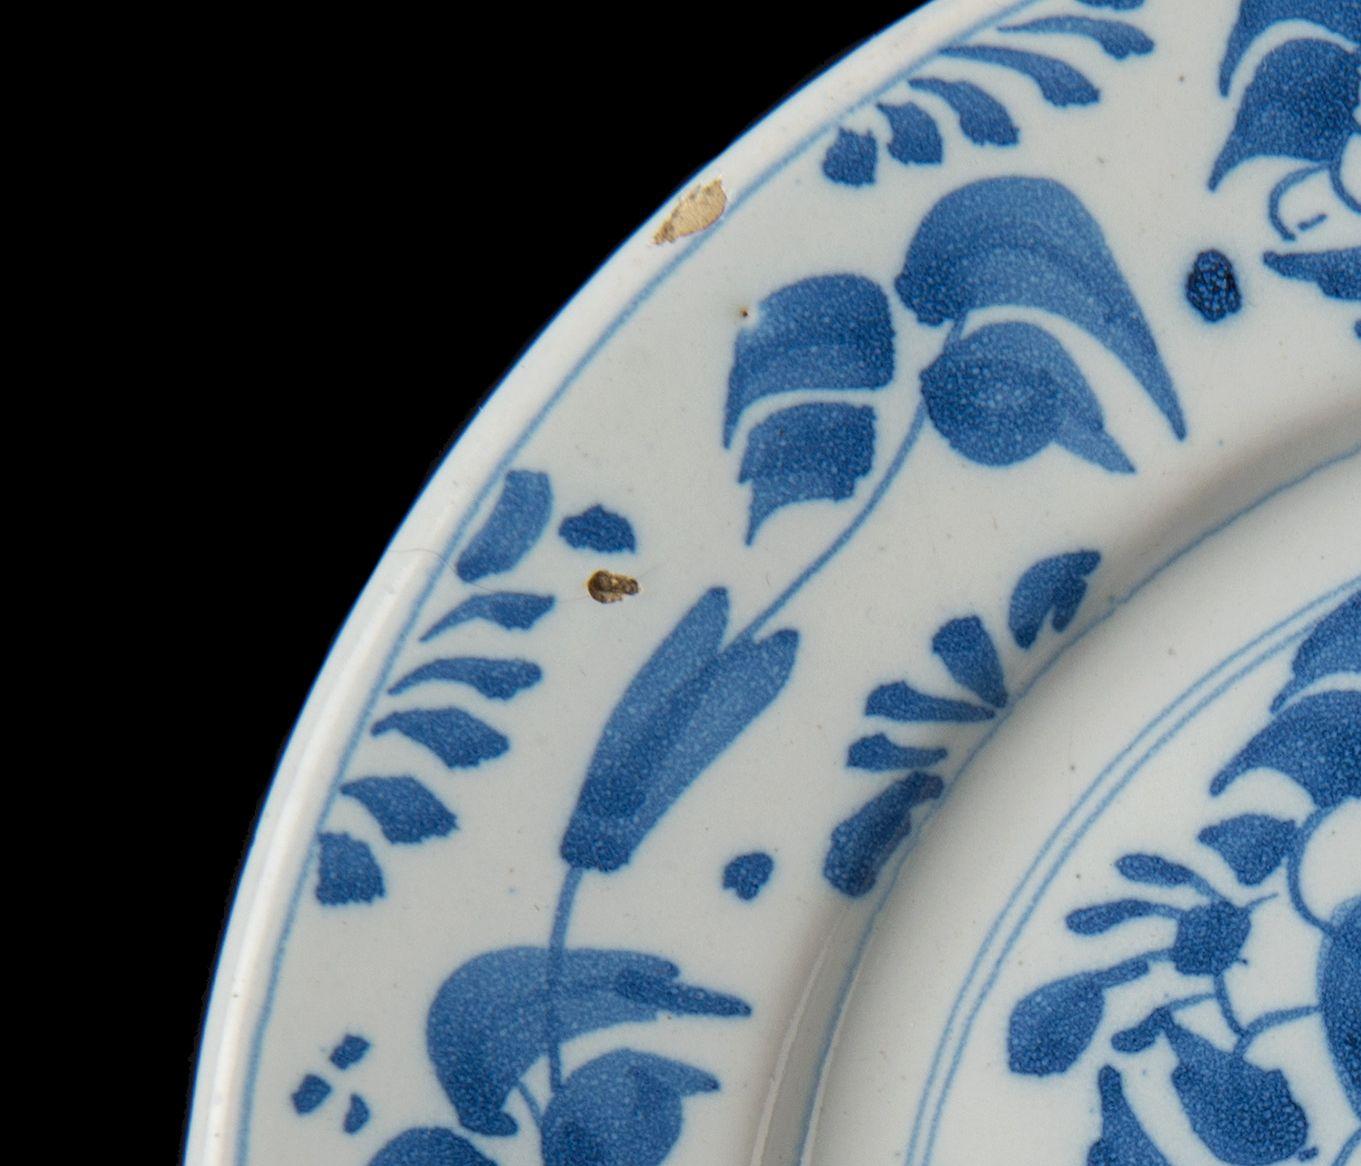 Mid-17th Century Blue and White Plate with Flower Vase. Delft, 1650-1680